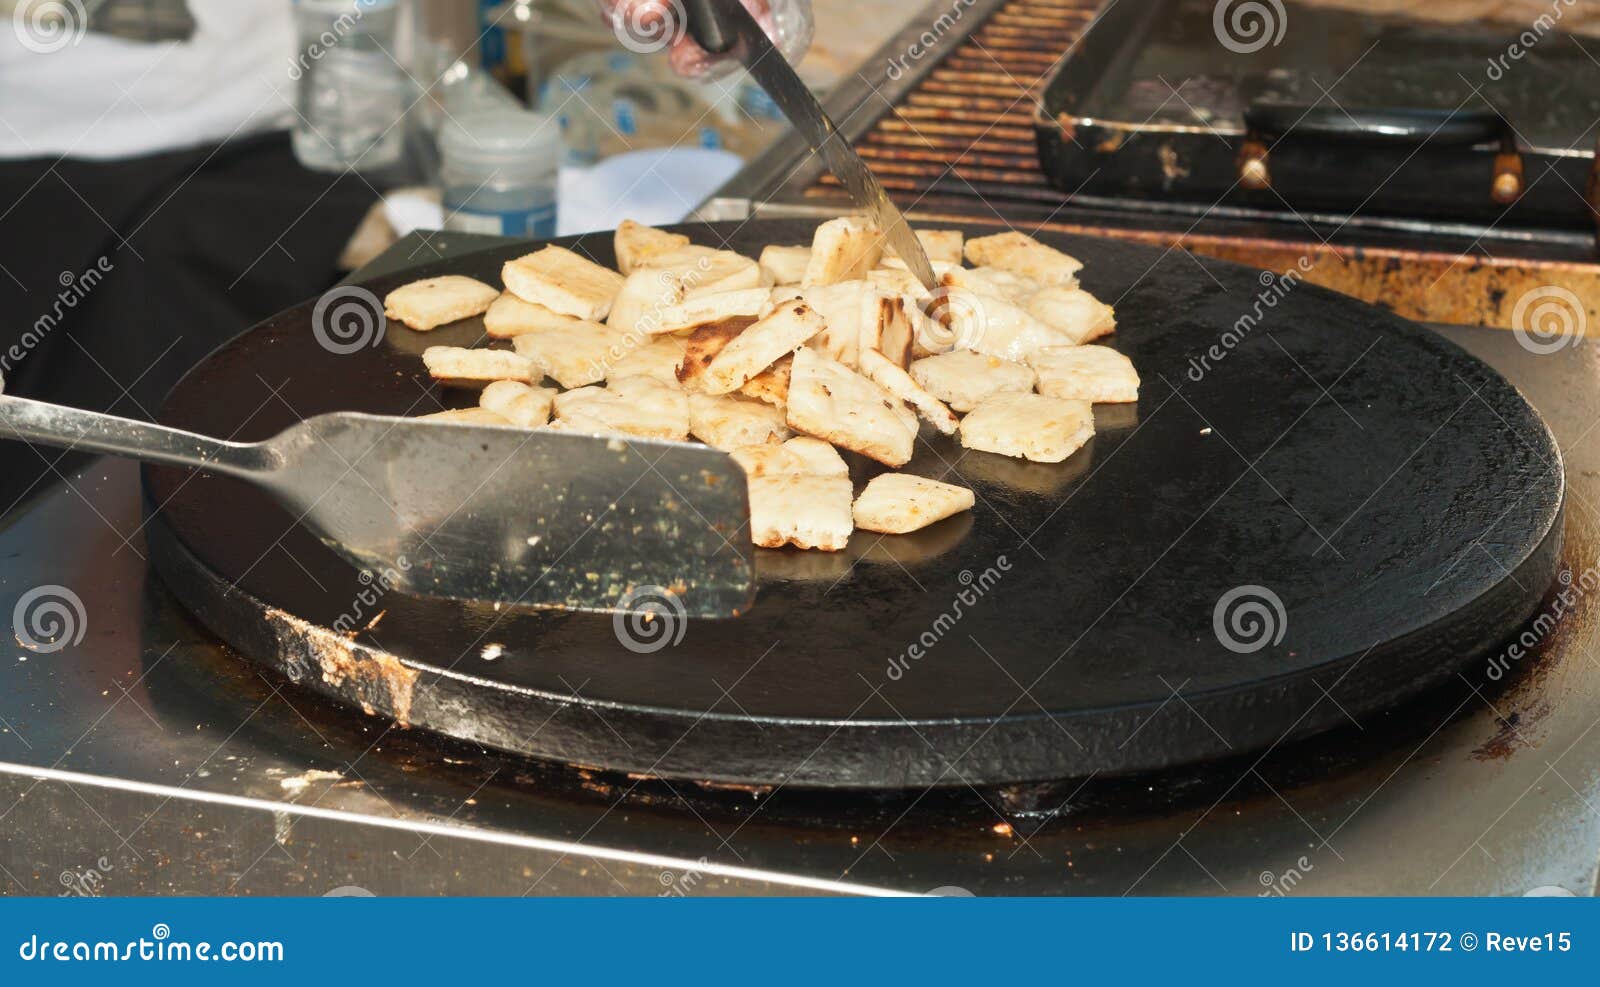 greek vender grilling ,squares of flatbread at a topical farmers market